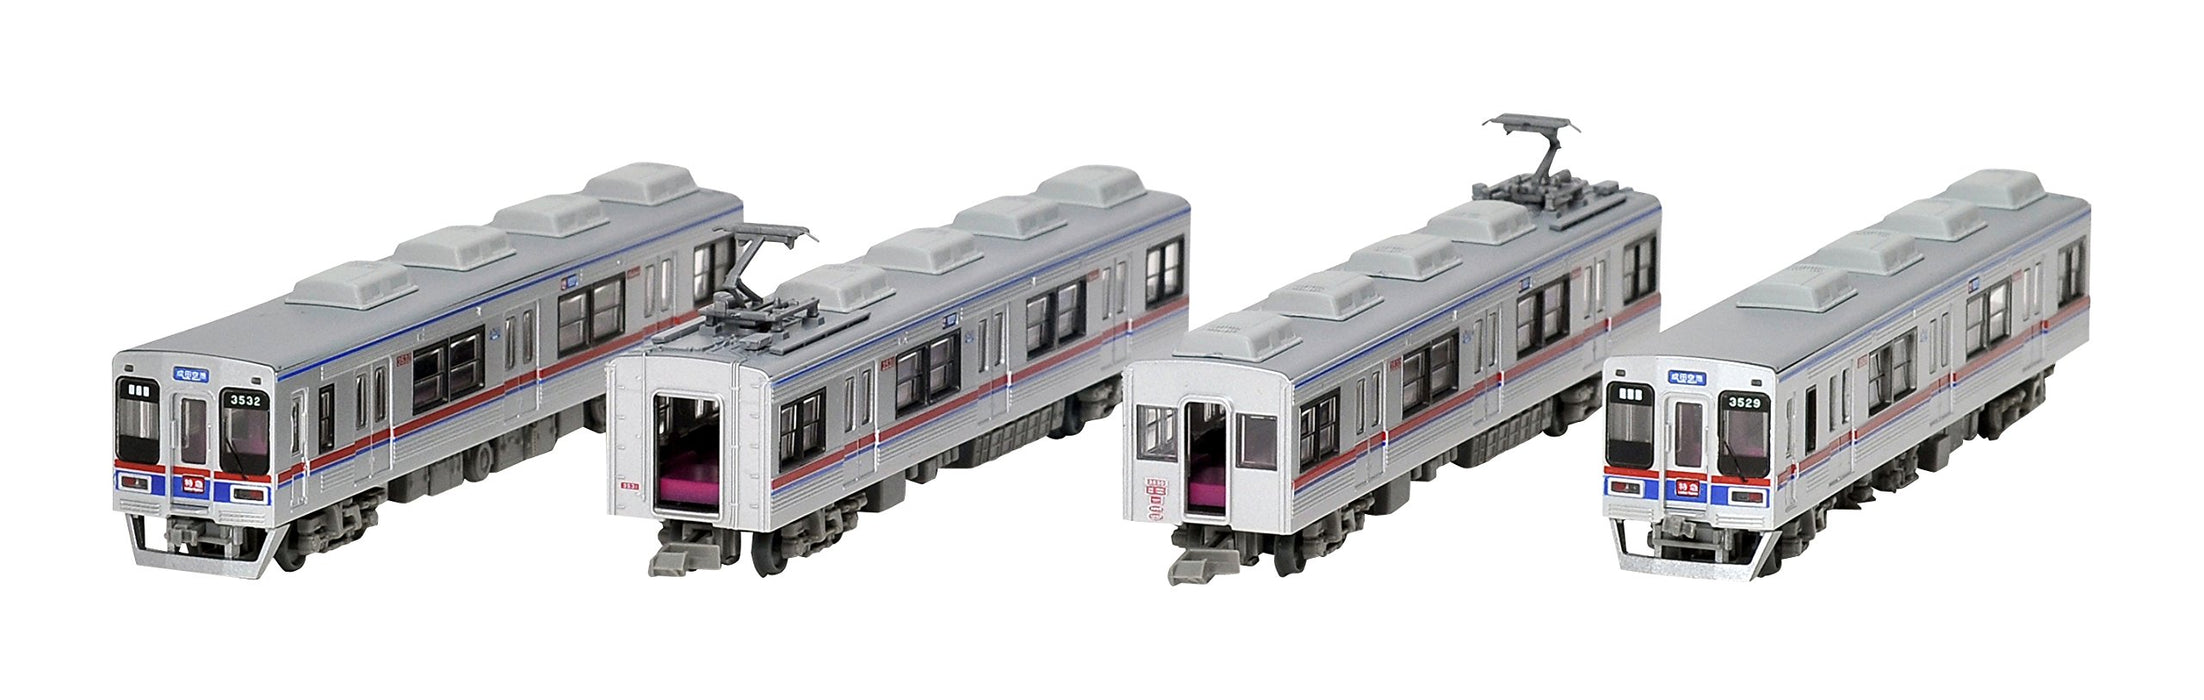 Tomytec Railway Collection Keisei Electric Type 3500 Updated 4-Car Diorama Set A